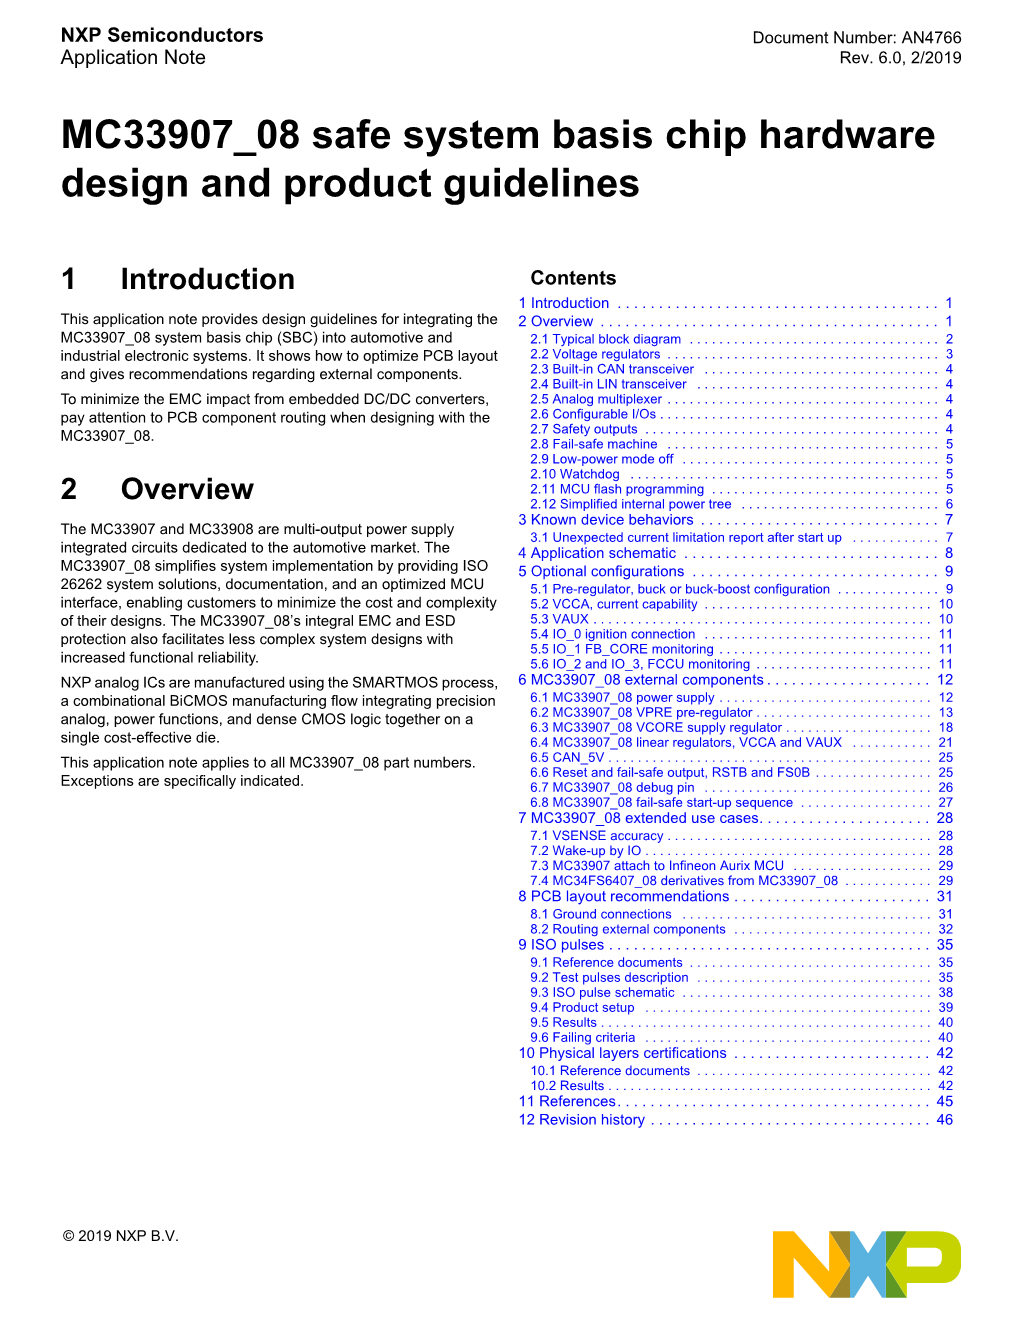 MC33907 08 Safe System Basis Chip Hardware Design and Product Guidelines